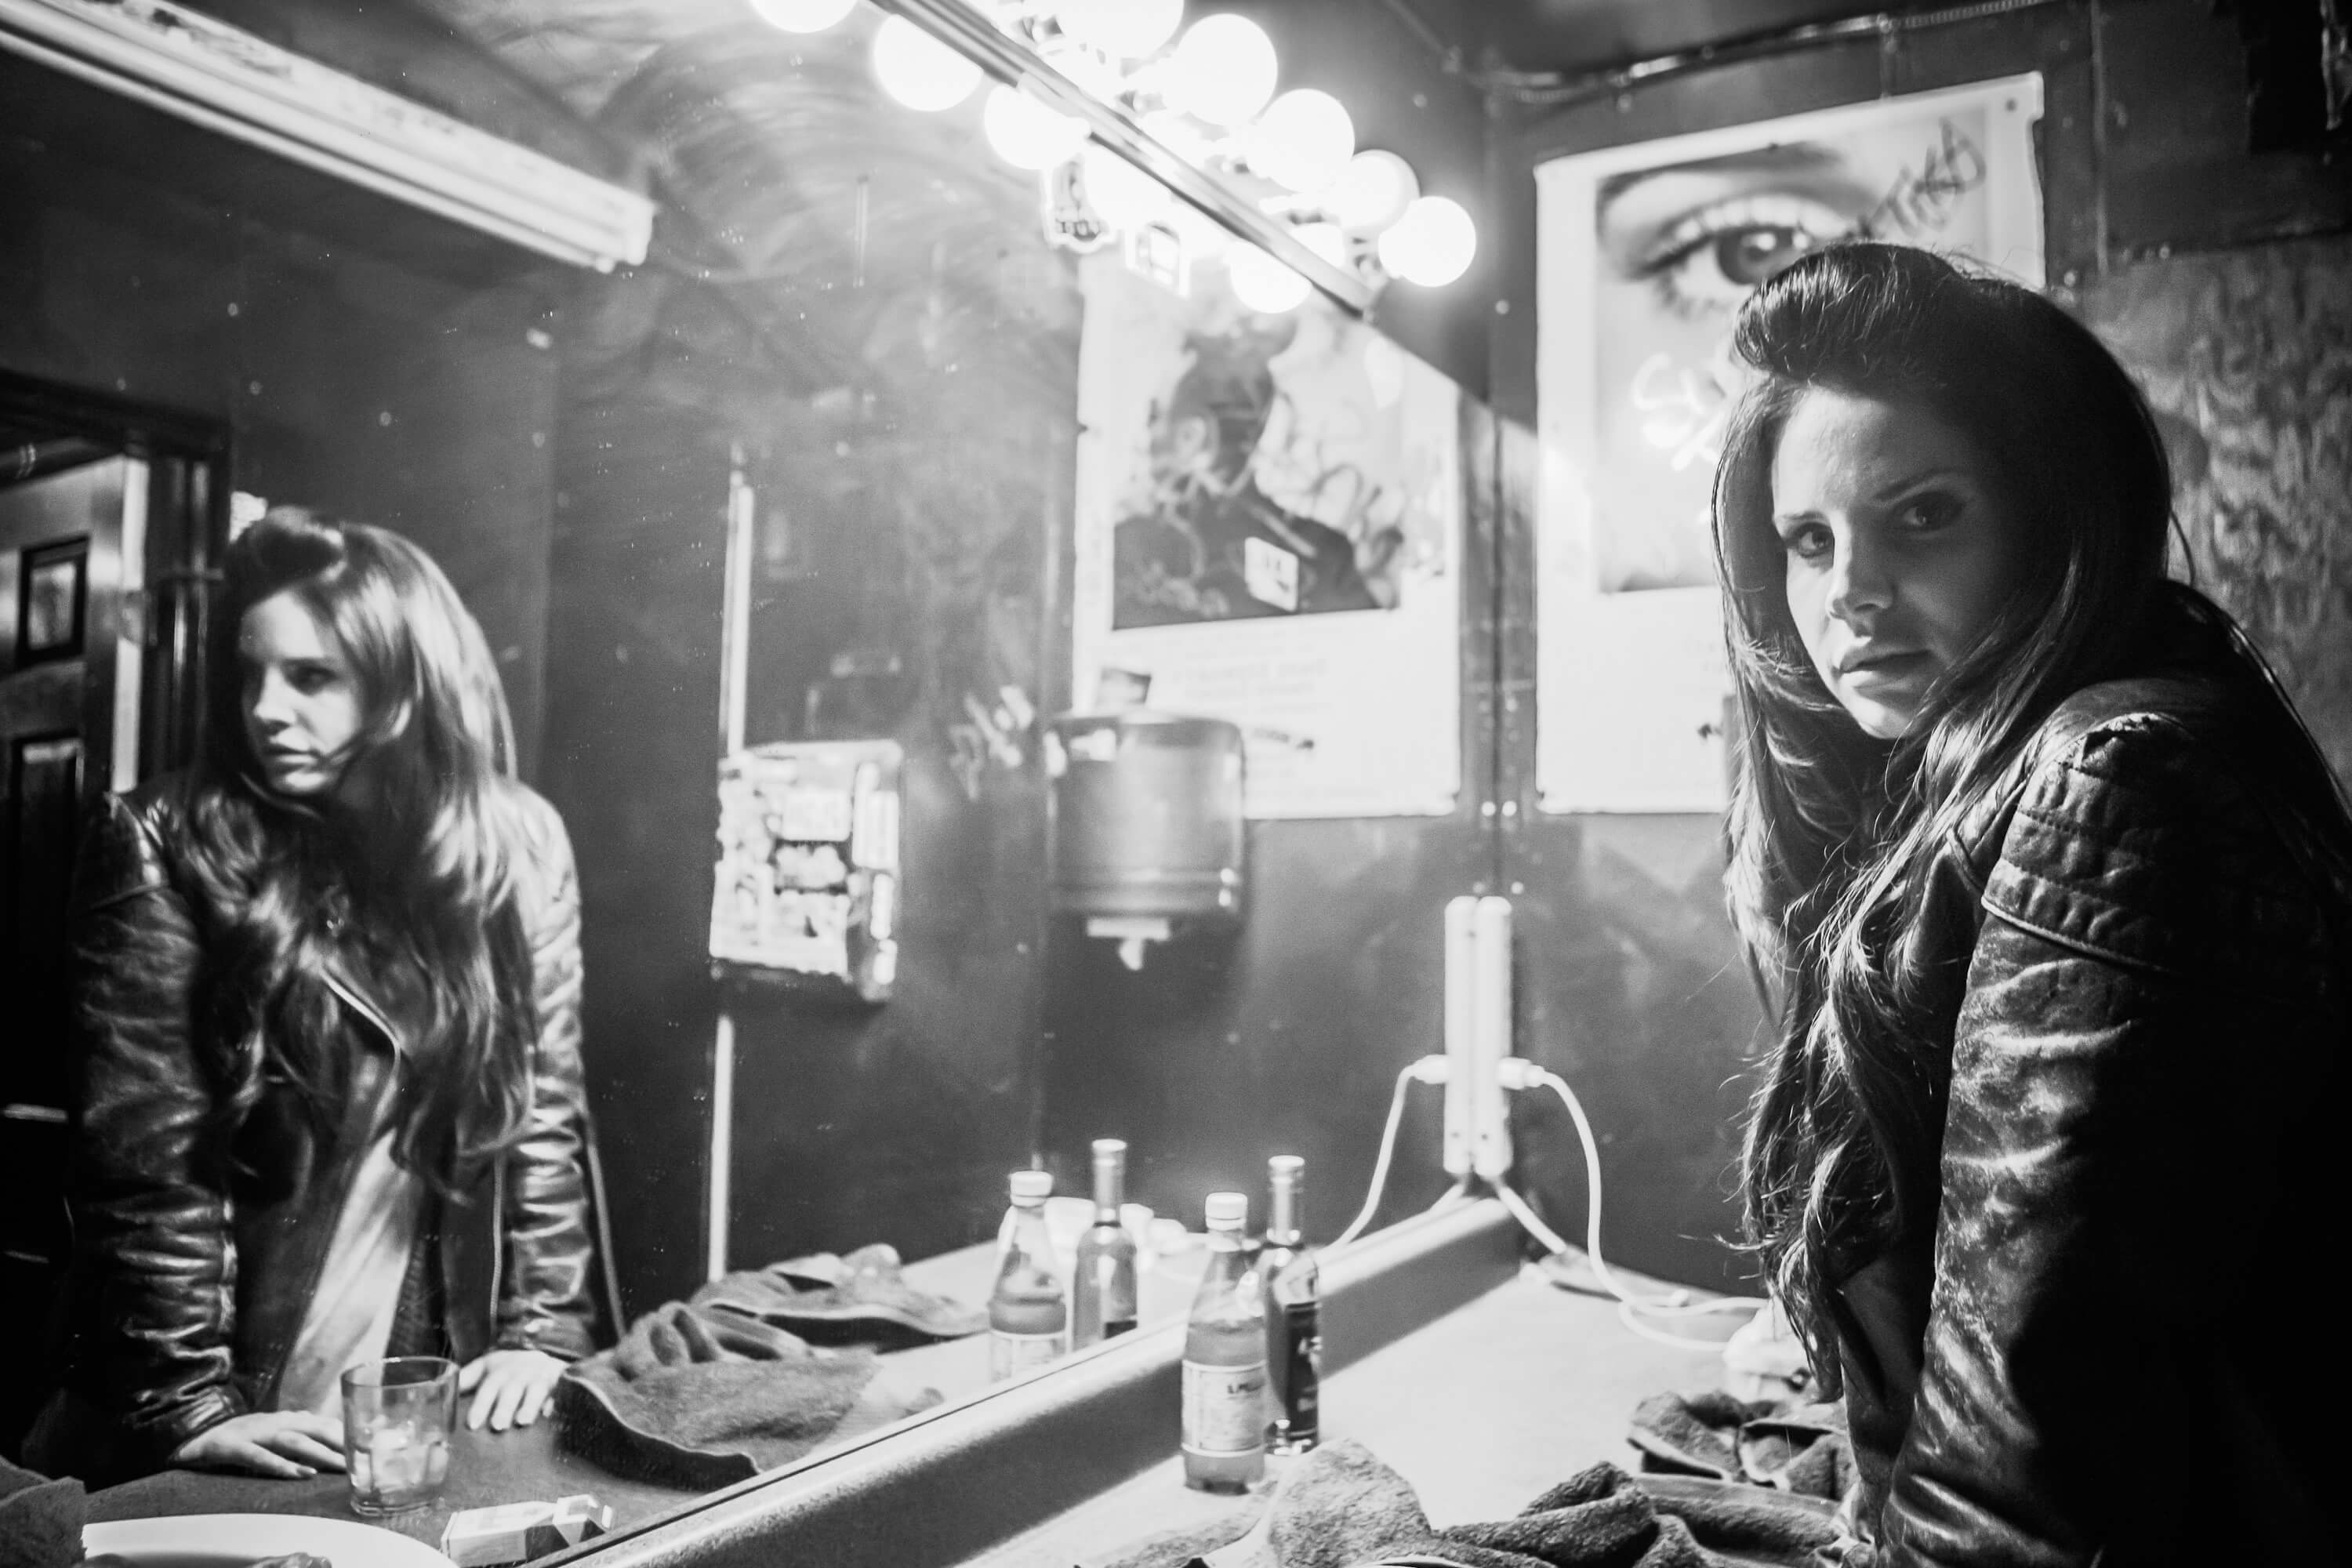 "Say Yes to Heaven" singer Lana Del Rey near a mirror